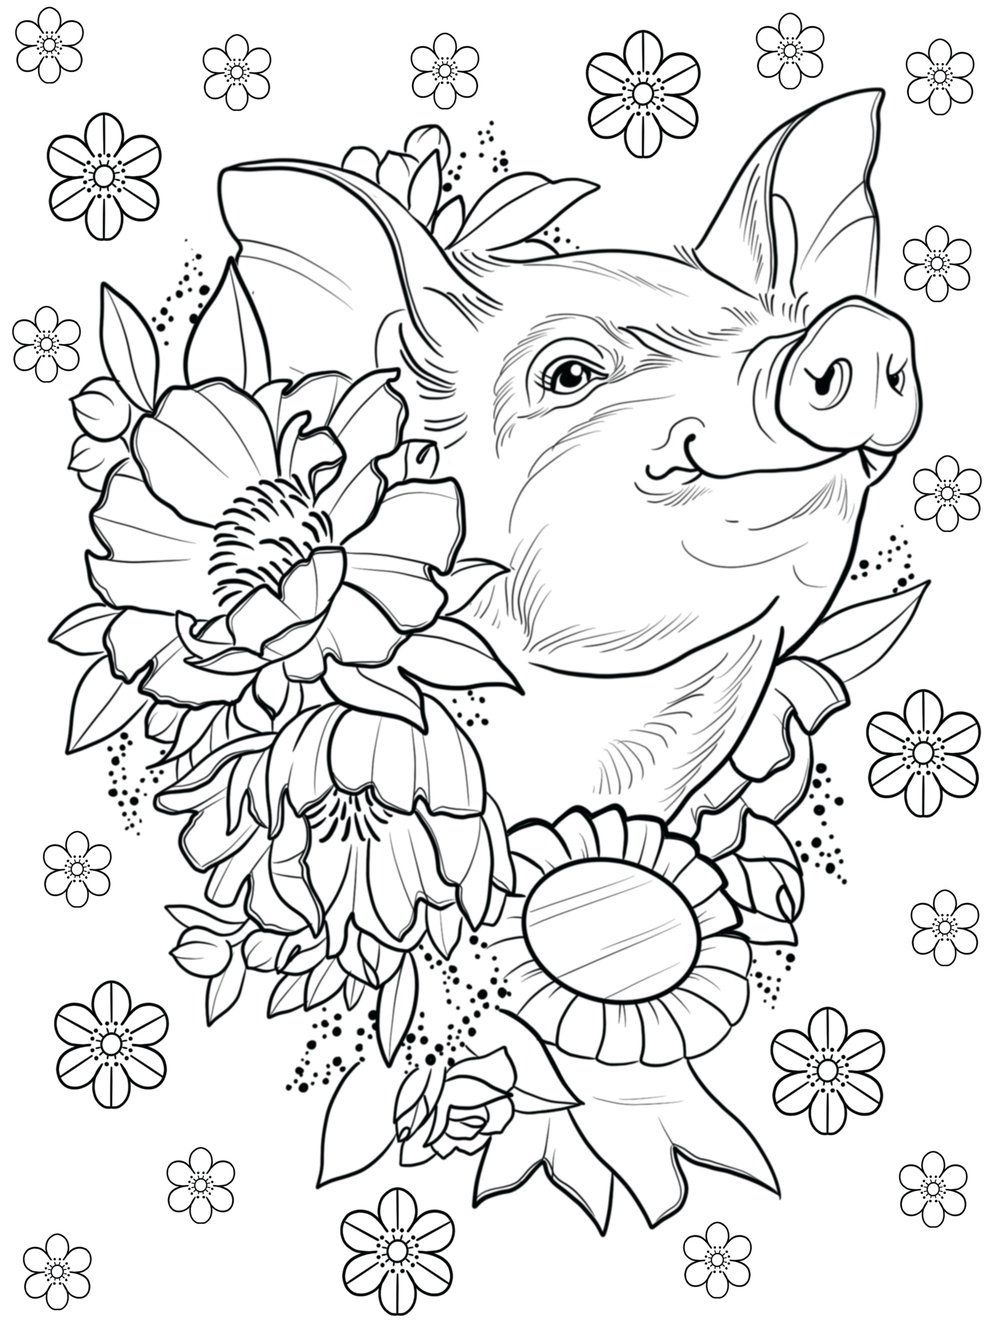 Snaggle Tooth Coloring Book